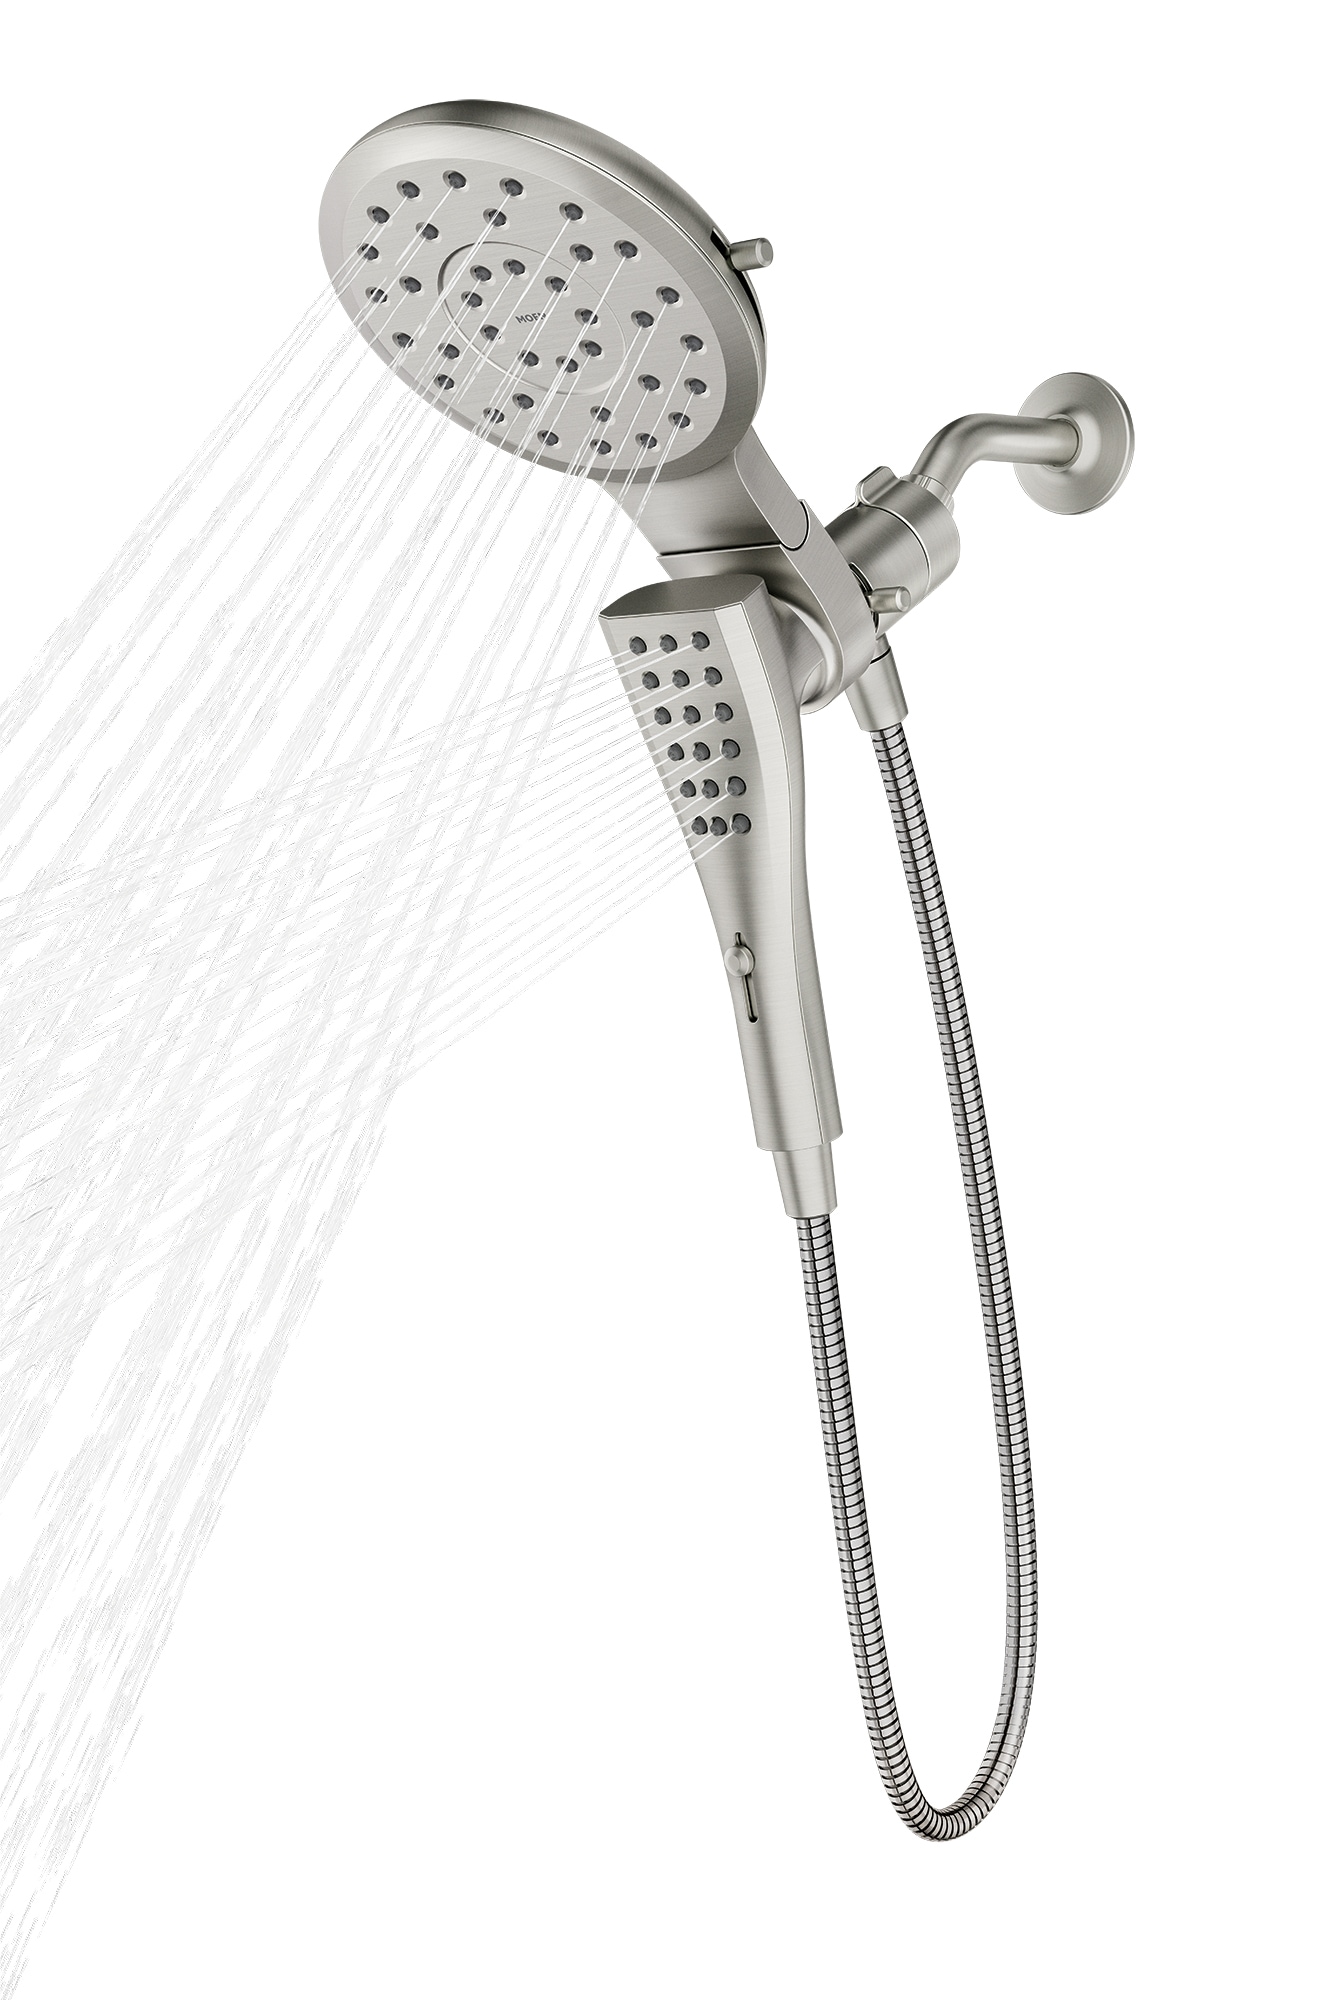 Selected Multi Function Handheld Shower Head Valve not included & Reviews